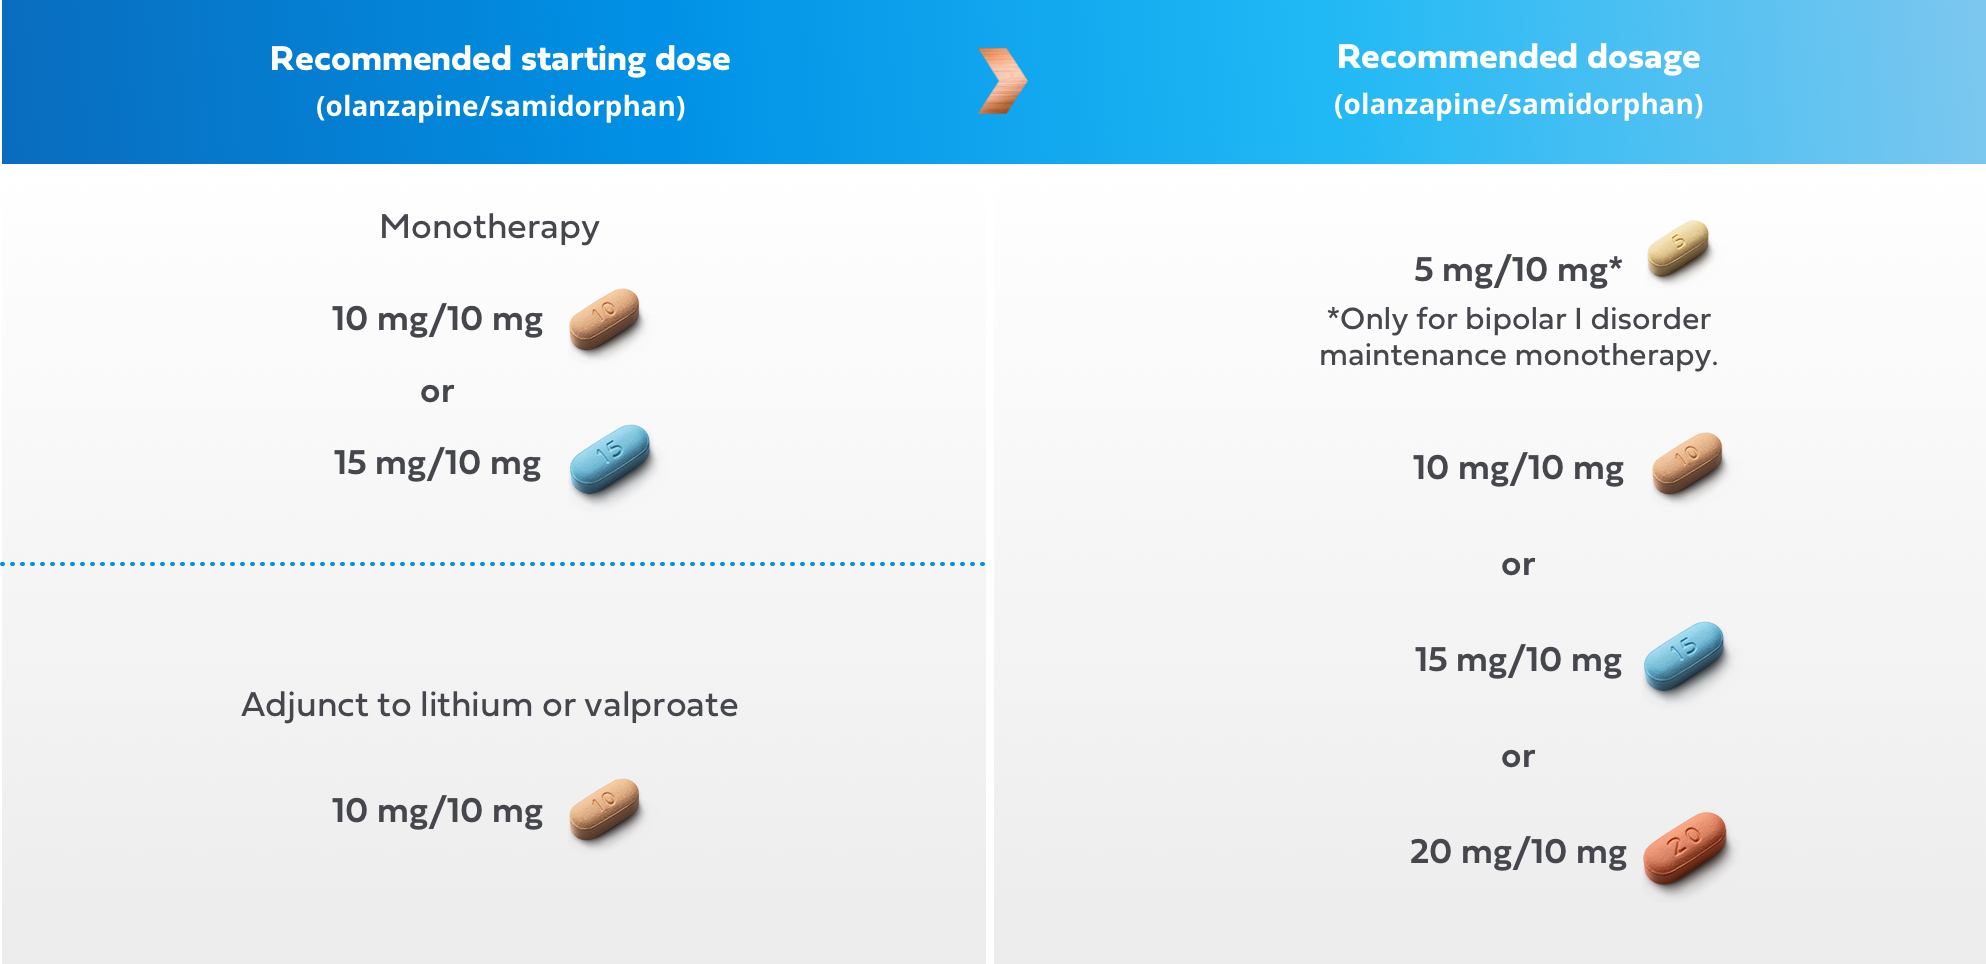 Table depicting starting and recommended dosages for adult patients with bipolar 1 disorder taking LYBALVI. The monotherapy recommended starting dosage of olanzapine/samidorphan is 5 mg/10 mg or 10 mg/10 mg. The adjust to lithium or valproate recommended starting dosage is 10 mg/10 mg. The recommended dosage is 5 mg/10 mg* (*only for bipolar 1 disorder maintenance monotherapy), 10 mg/10 mg, 15 mg/10 mg, or 20 mg/10 mg